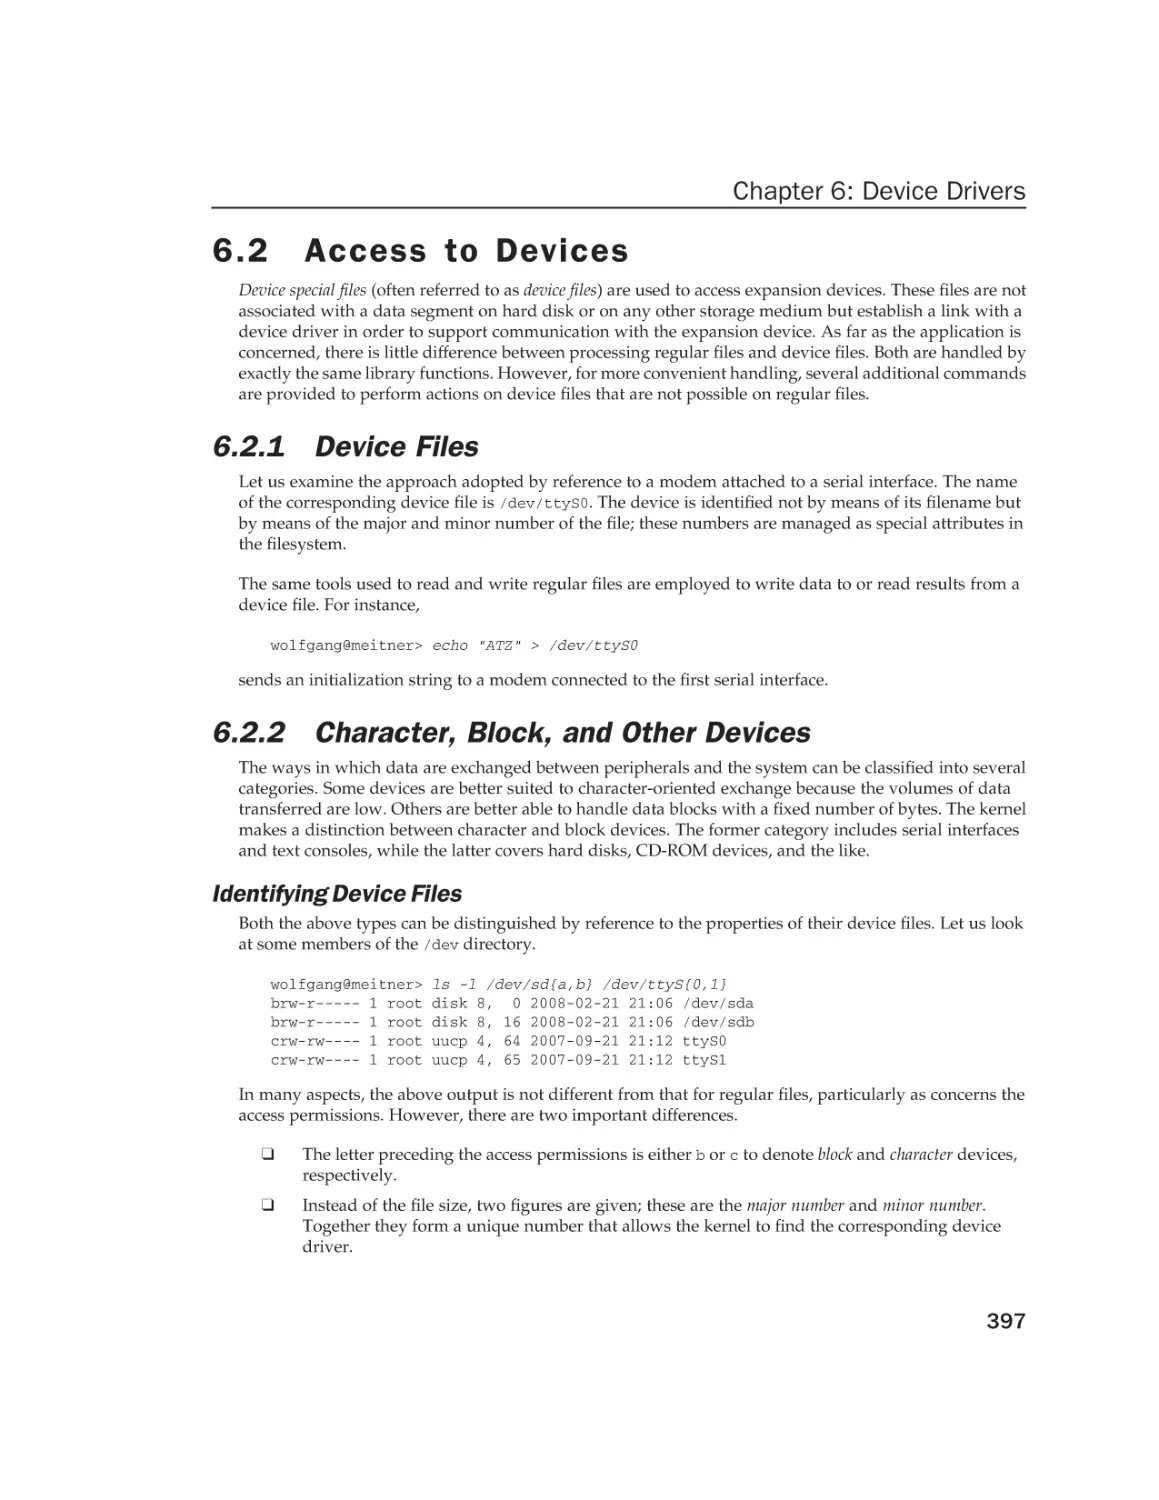 6.2 Access to Devices